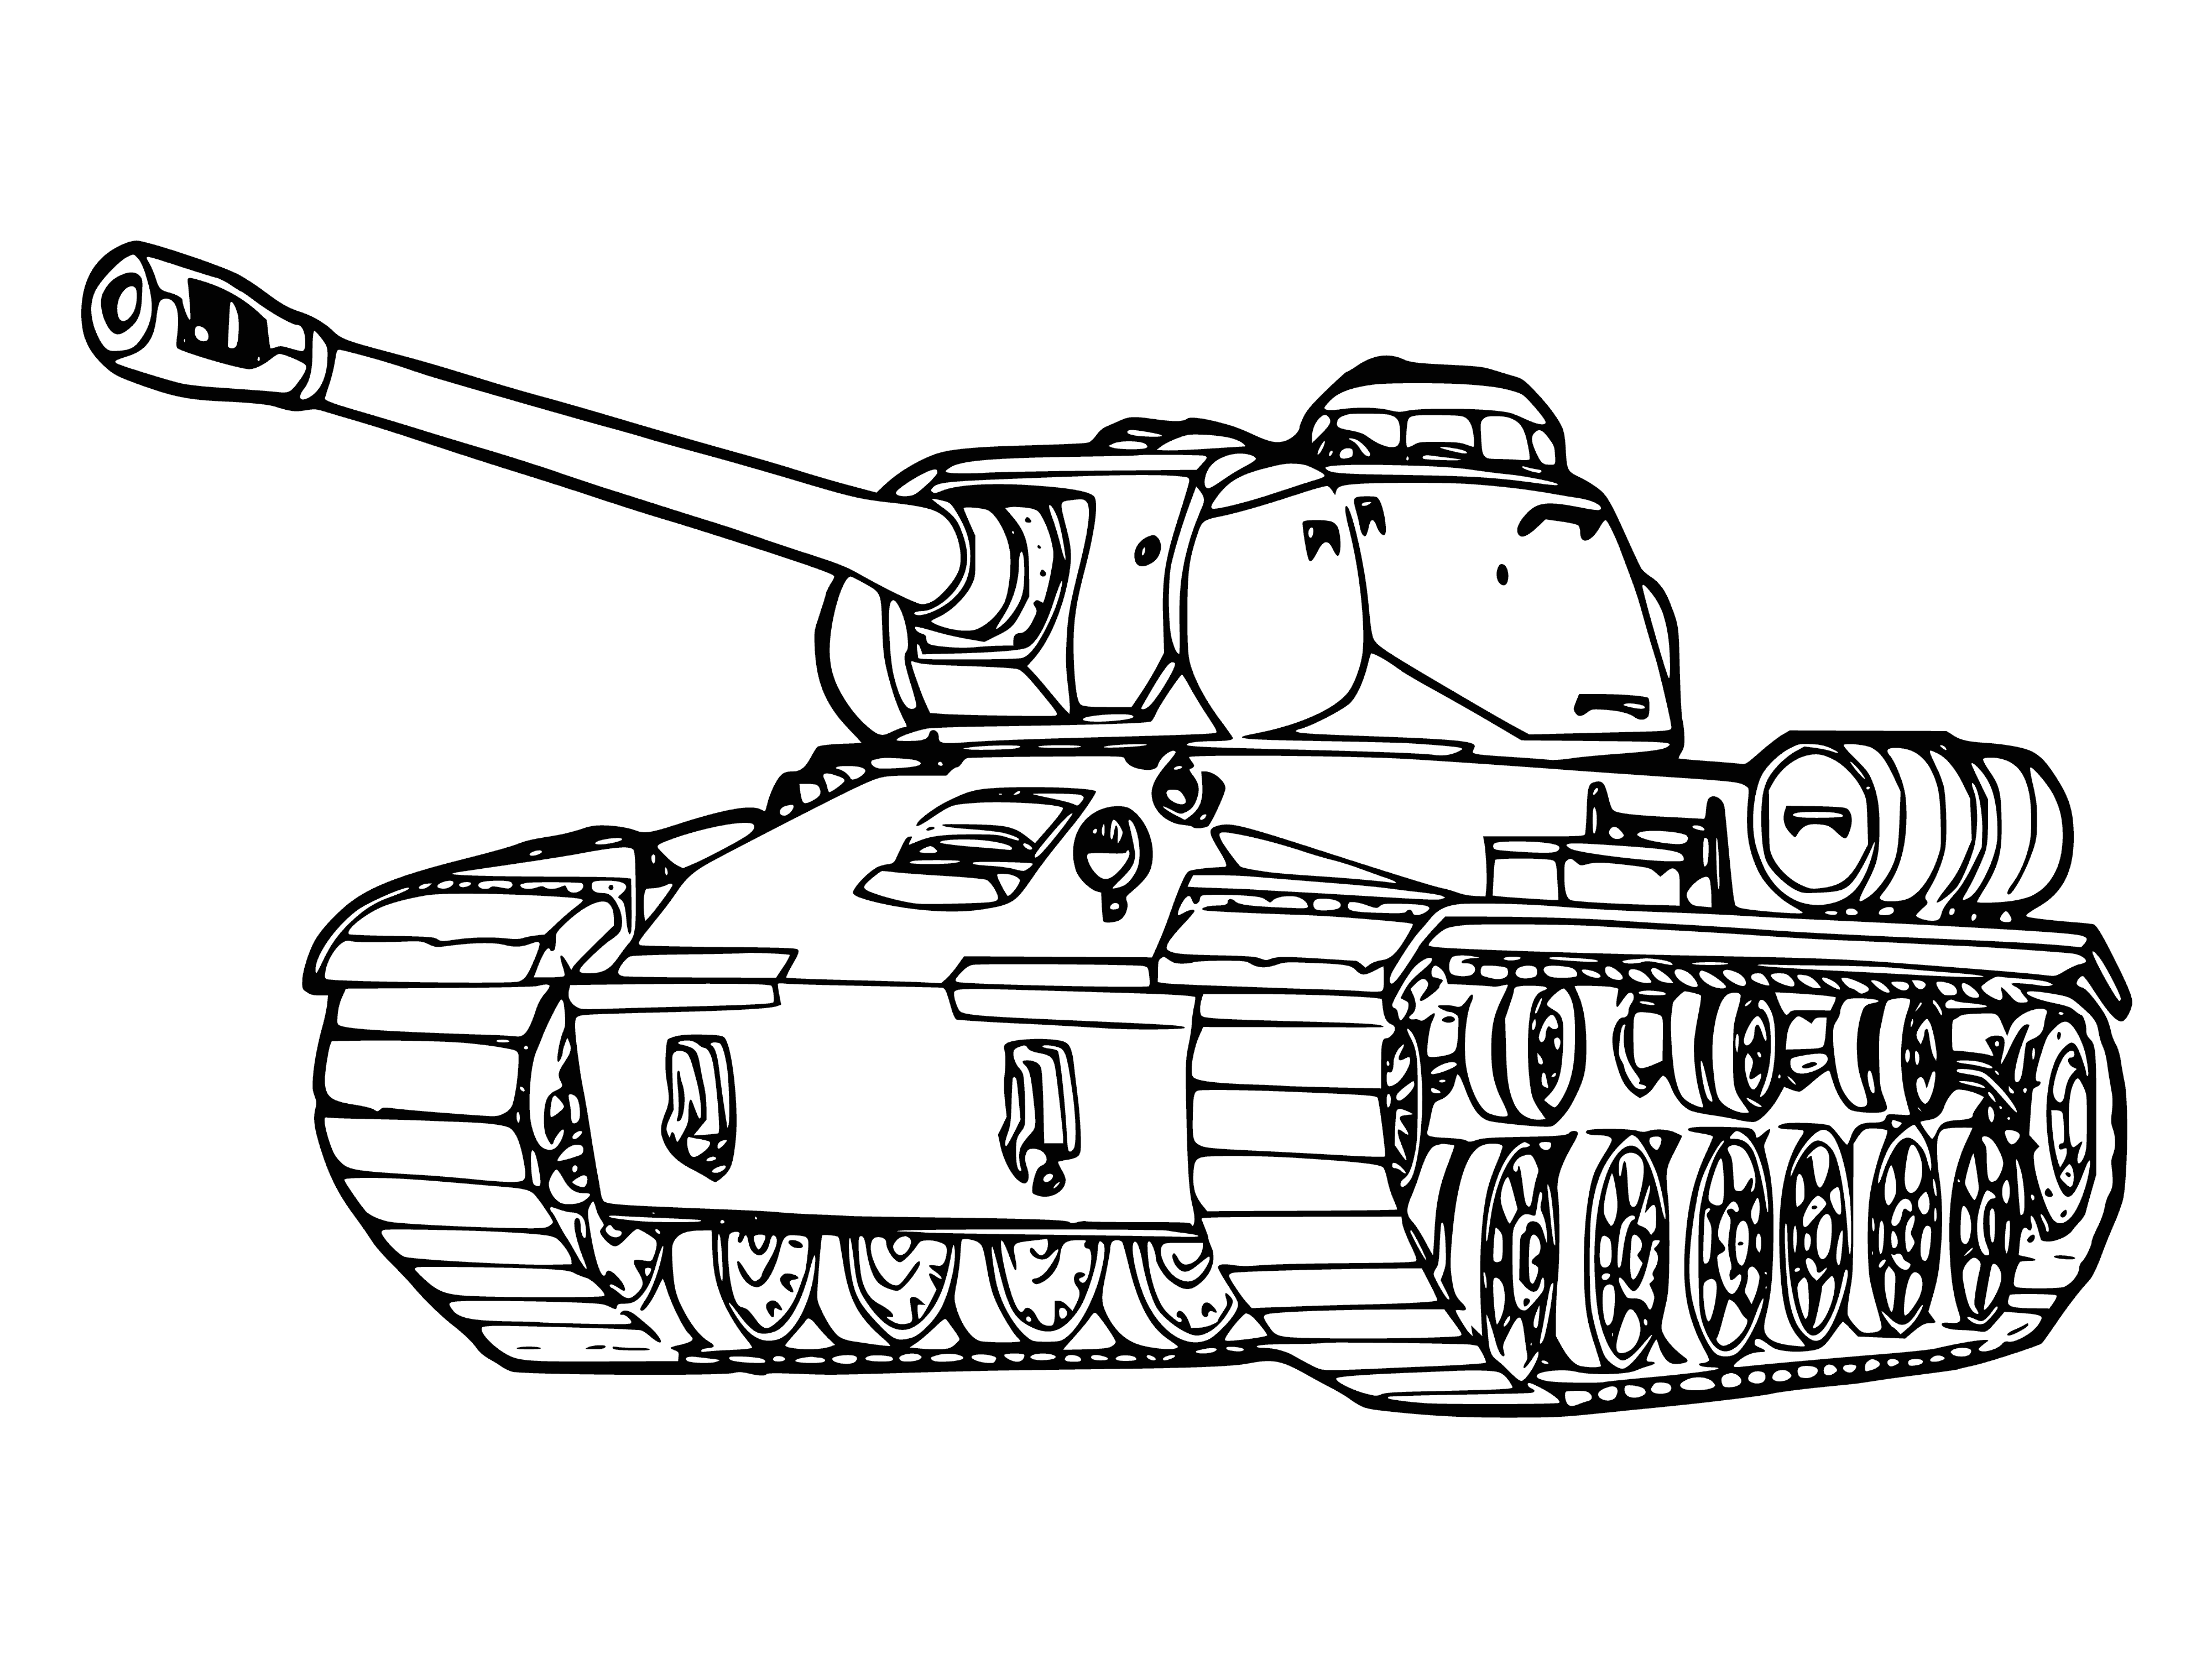 coloring page: Large gray tank parked in a lot w/ turret, long barrel, 4 large black tires, and several hatches on top & sides.